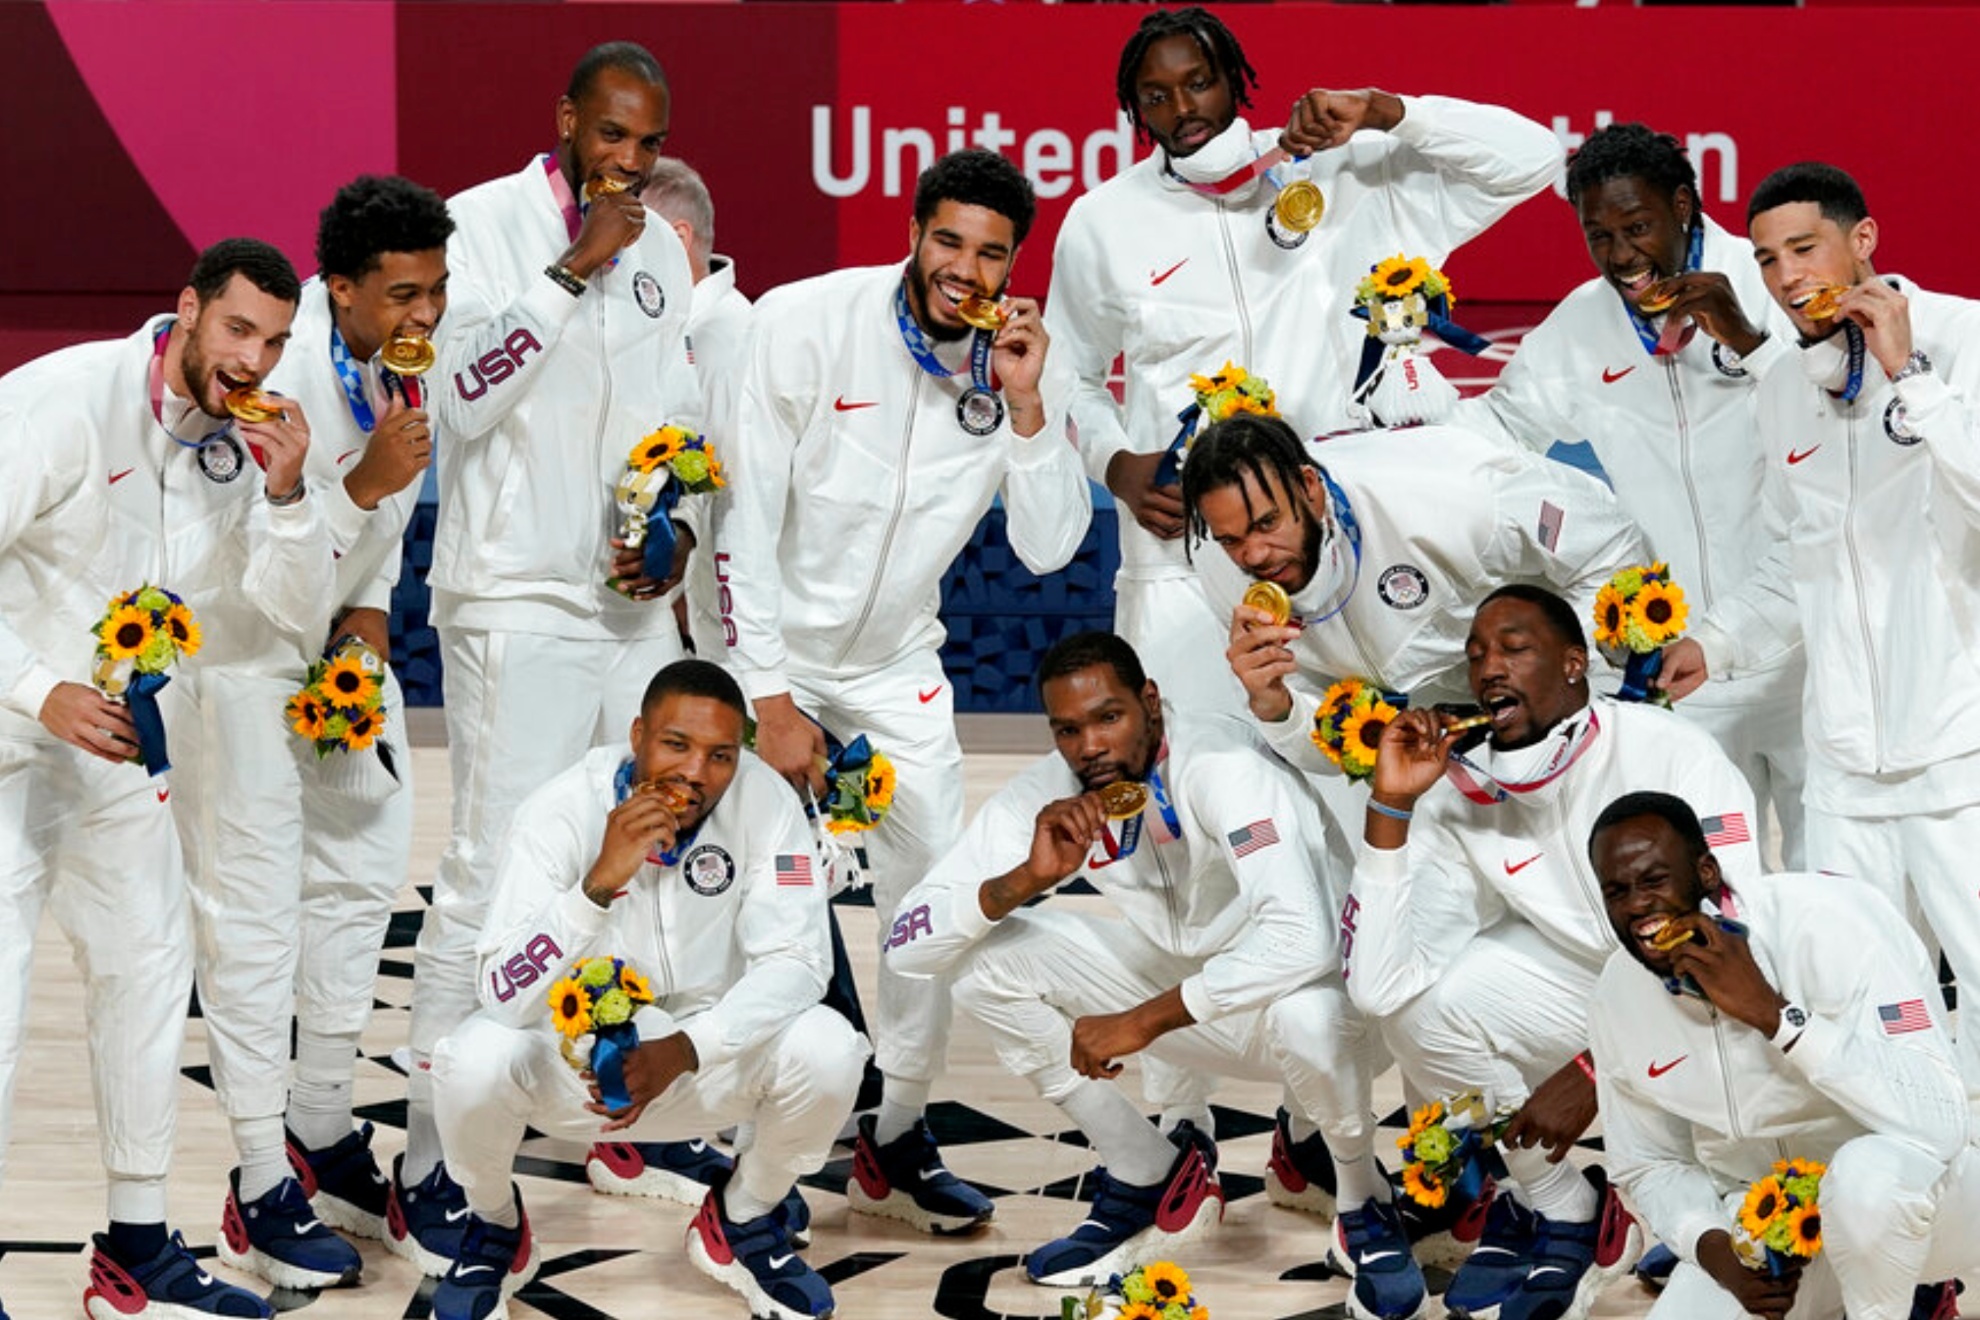 Team USA Basketball announced the player pool for the 12-man selection ahead of the Paris Olympic Games